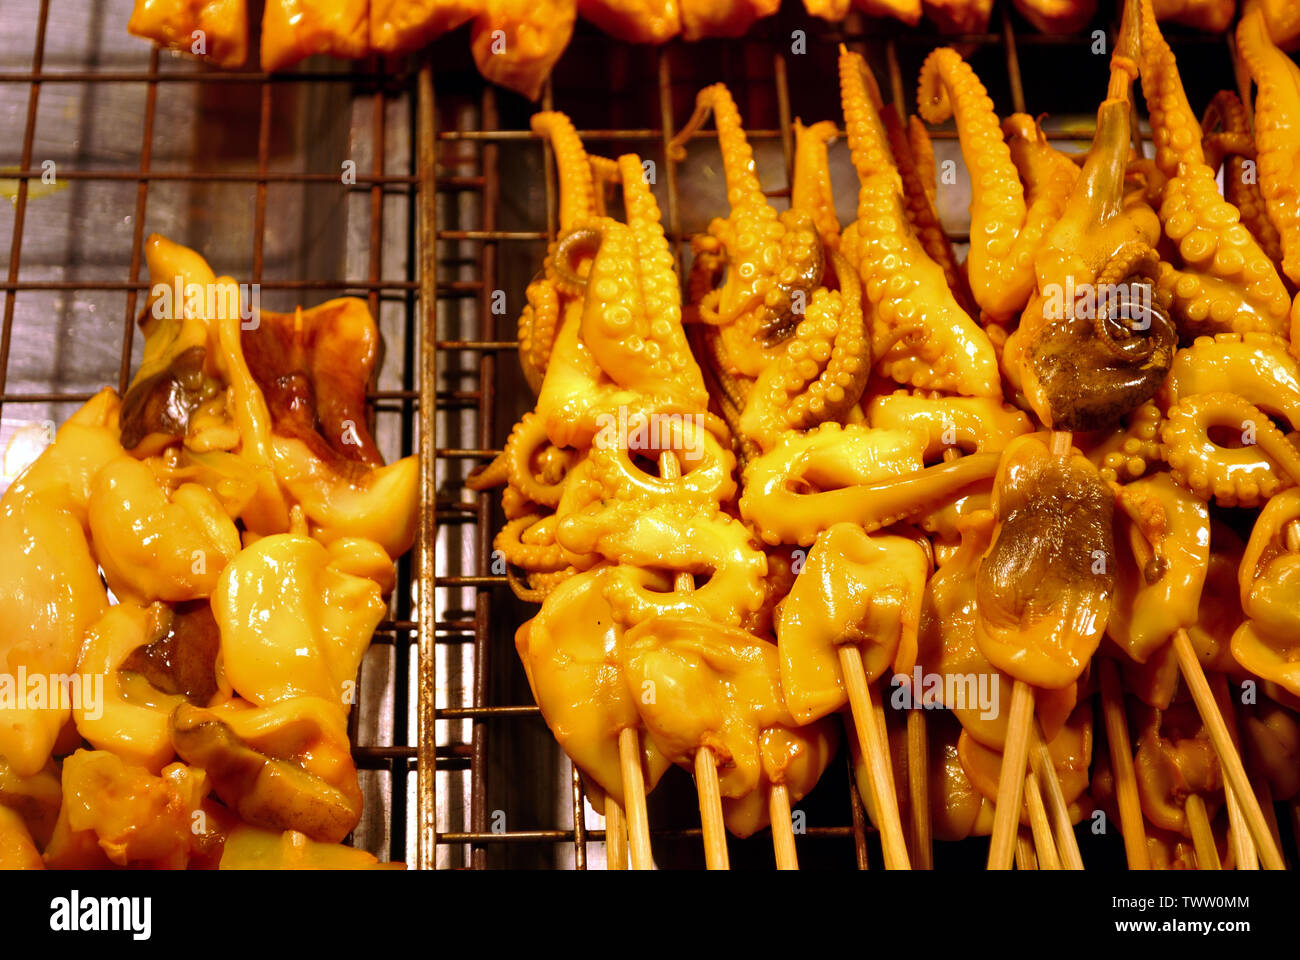 Squid marinated in the side dishes of the shop, placed on the tray, ready  for sale and grill service, waiting for customers to choose Stock Photo -  Alamy